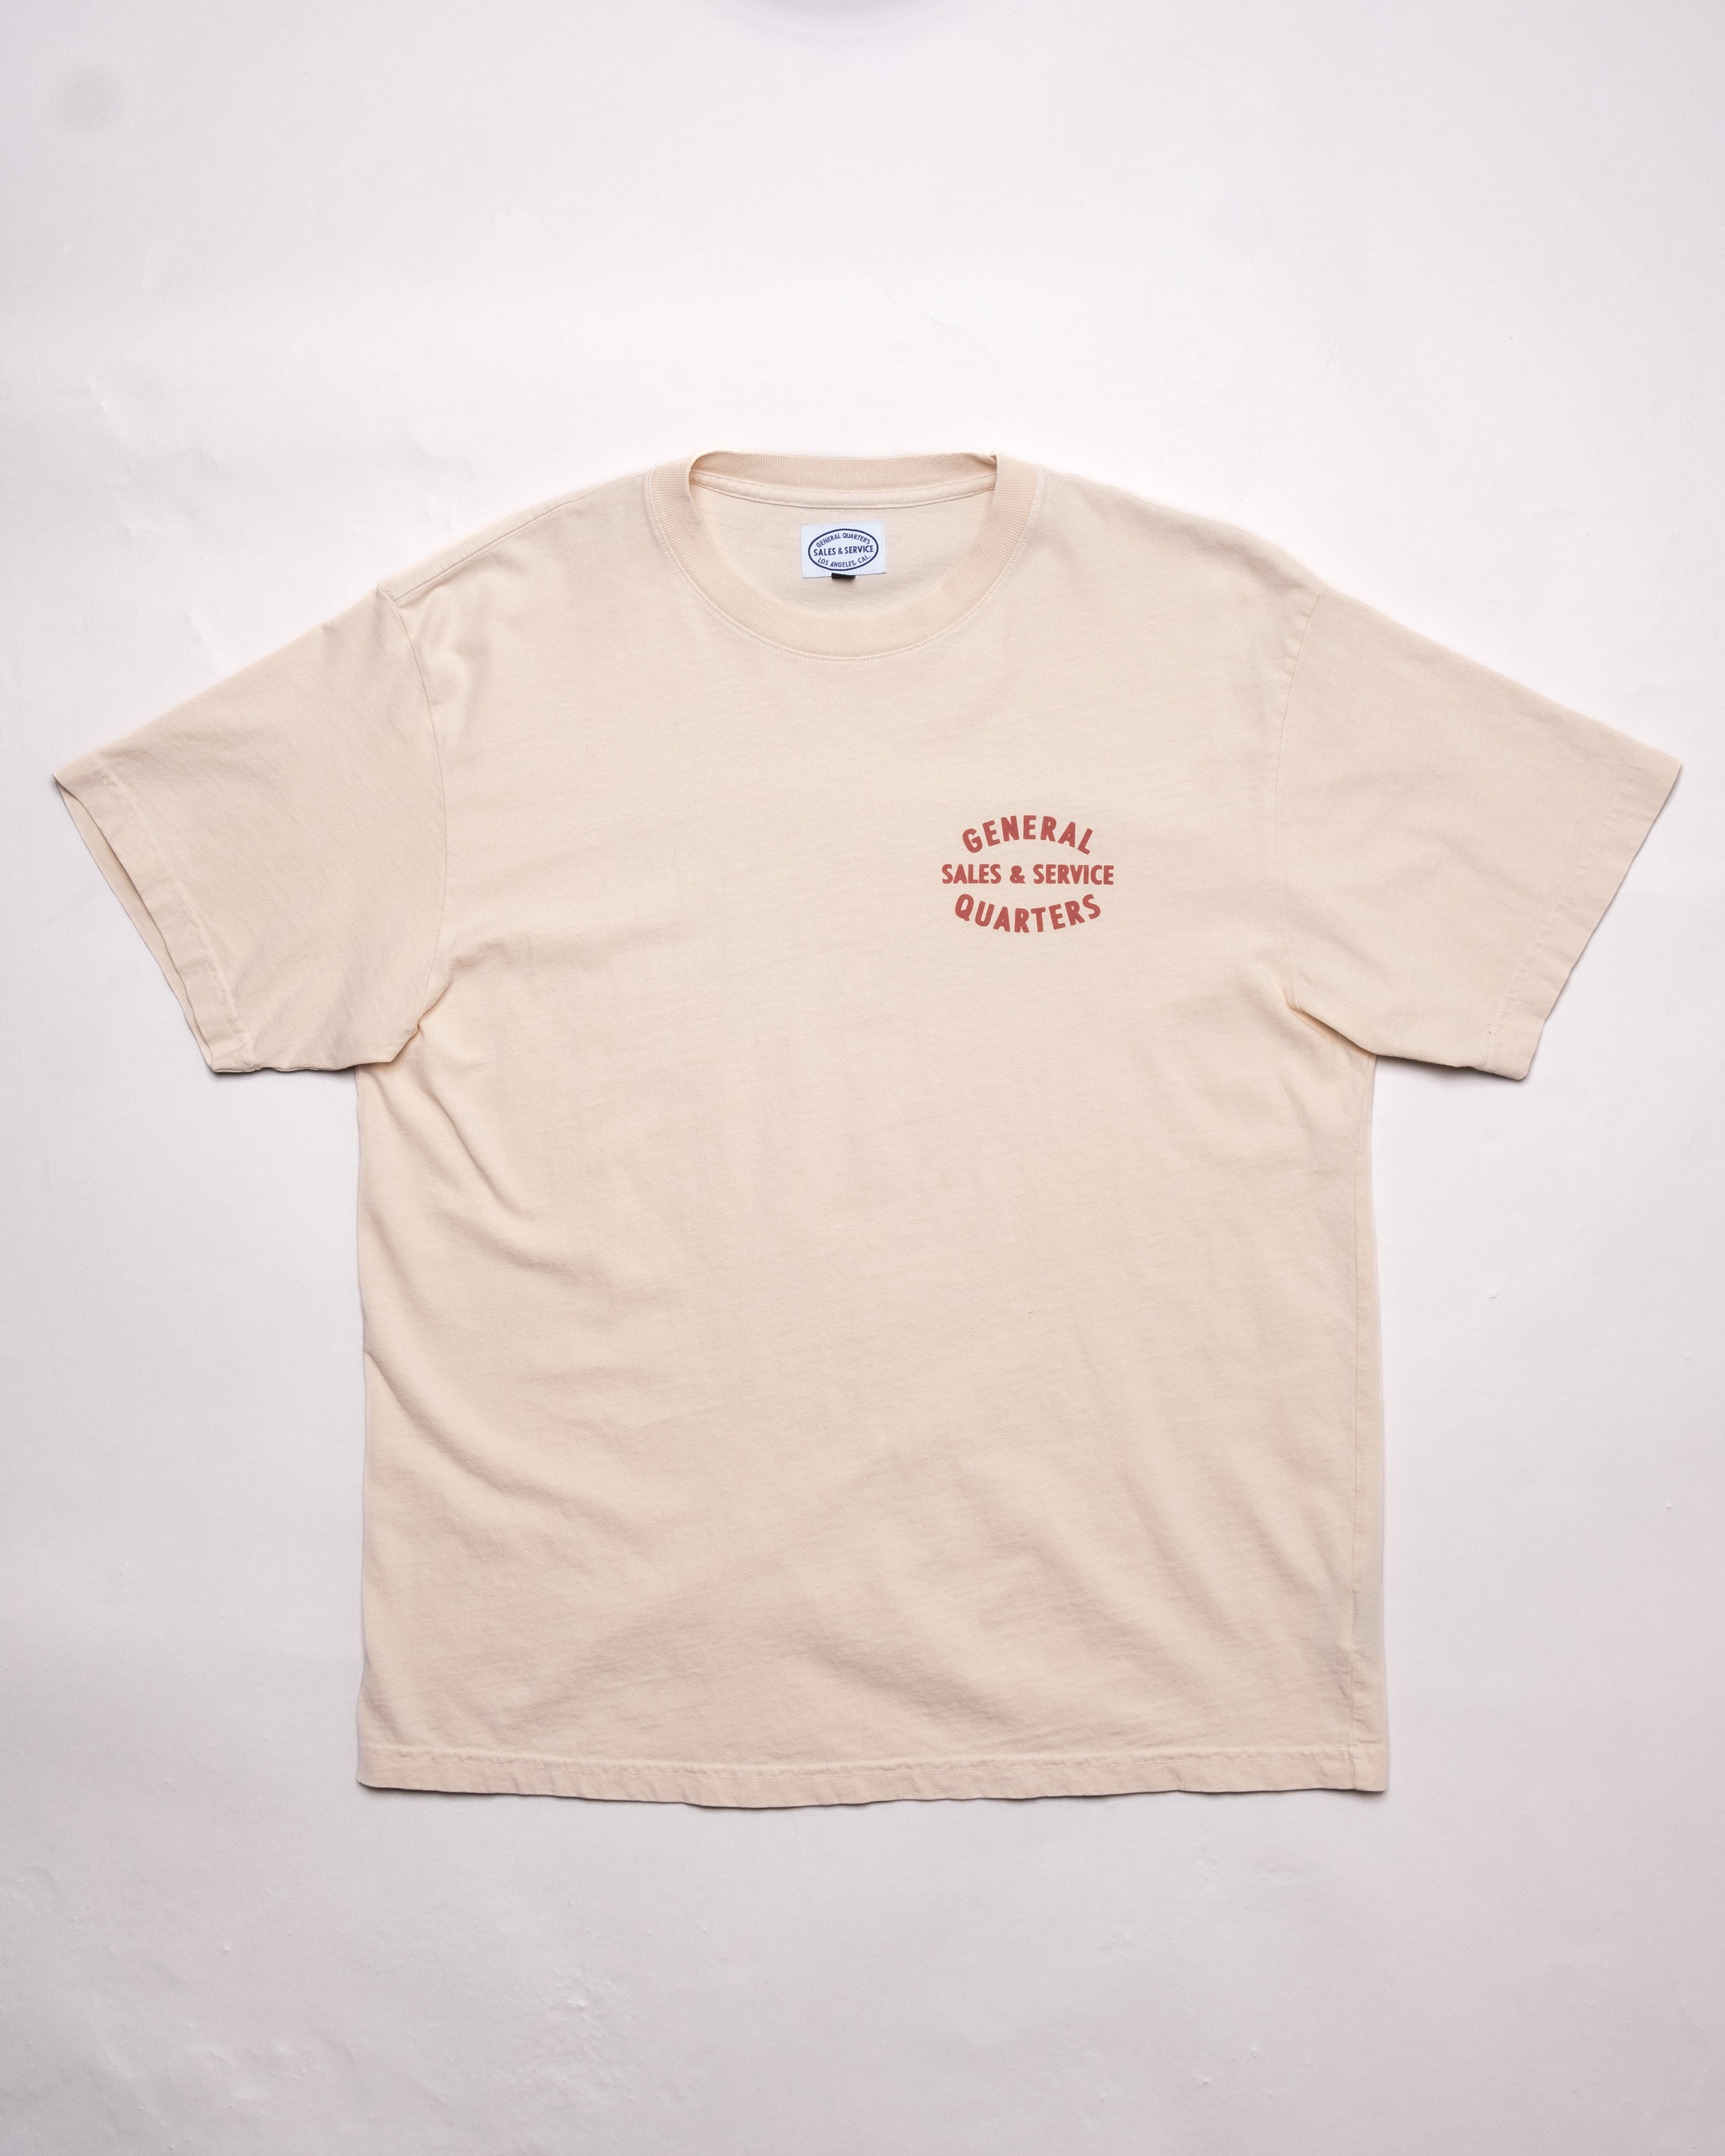 Ensign Heavy Weight T-Shirt in Cream